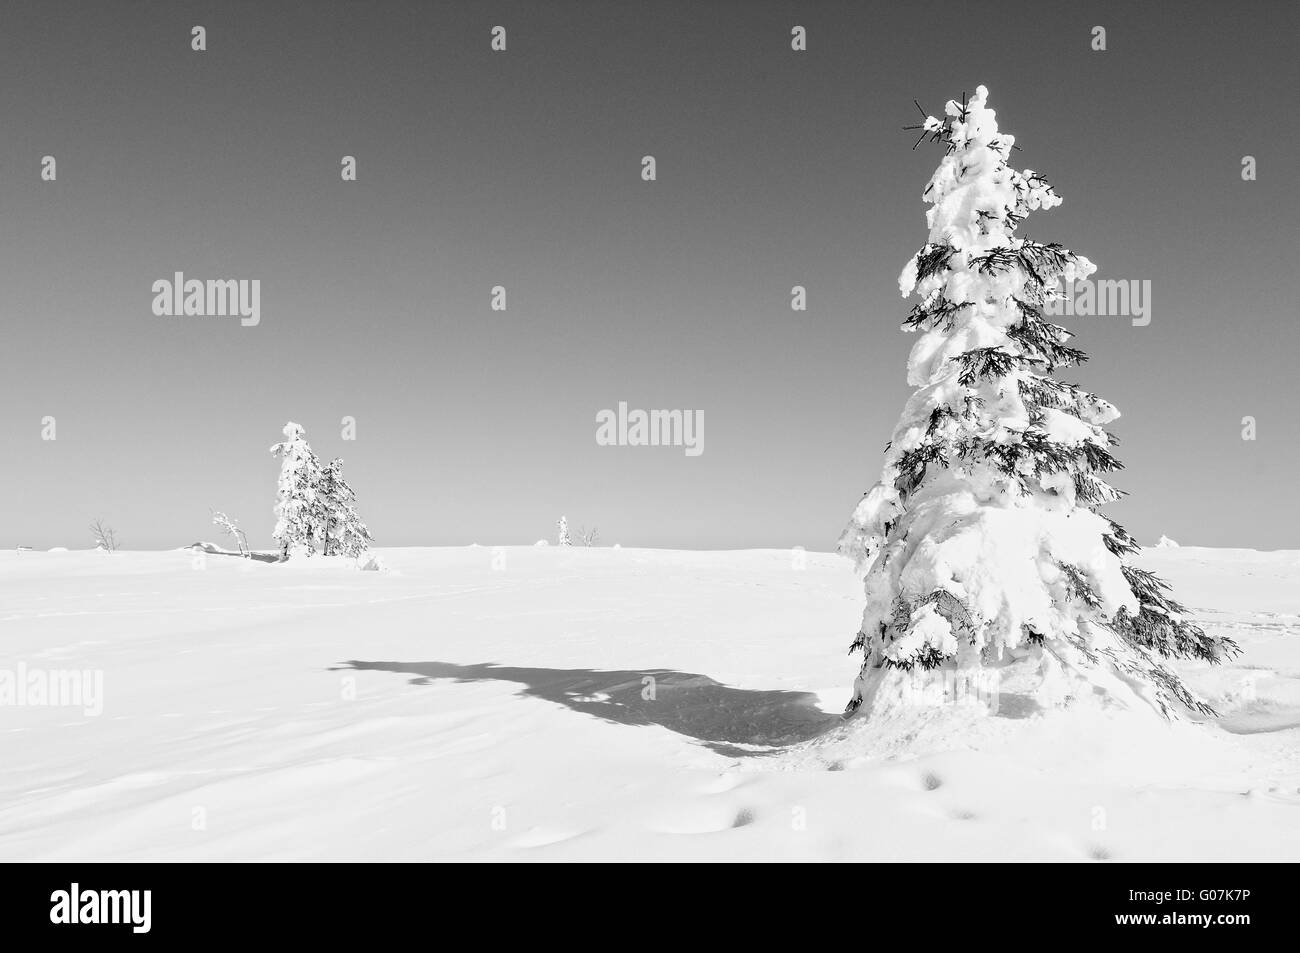 Horizon with snowy spruce trees black and white Stock Photo